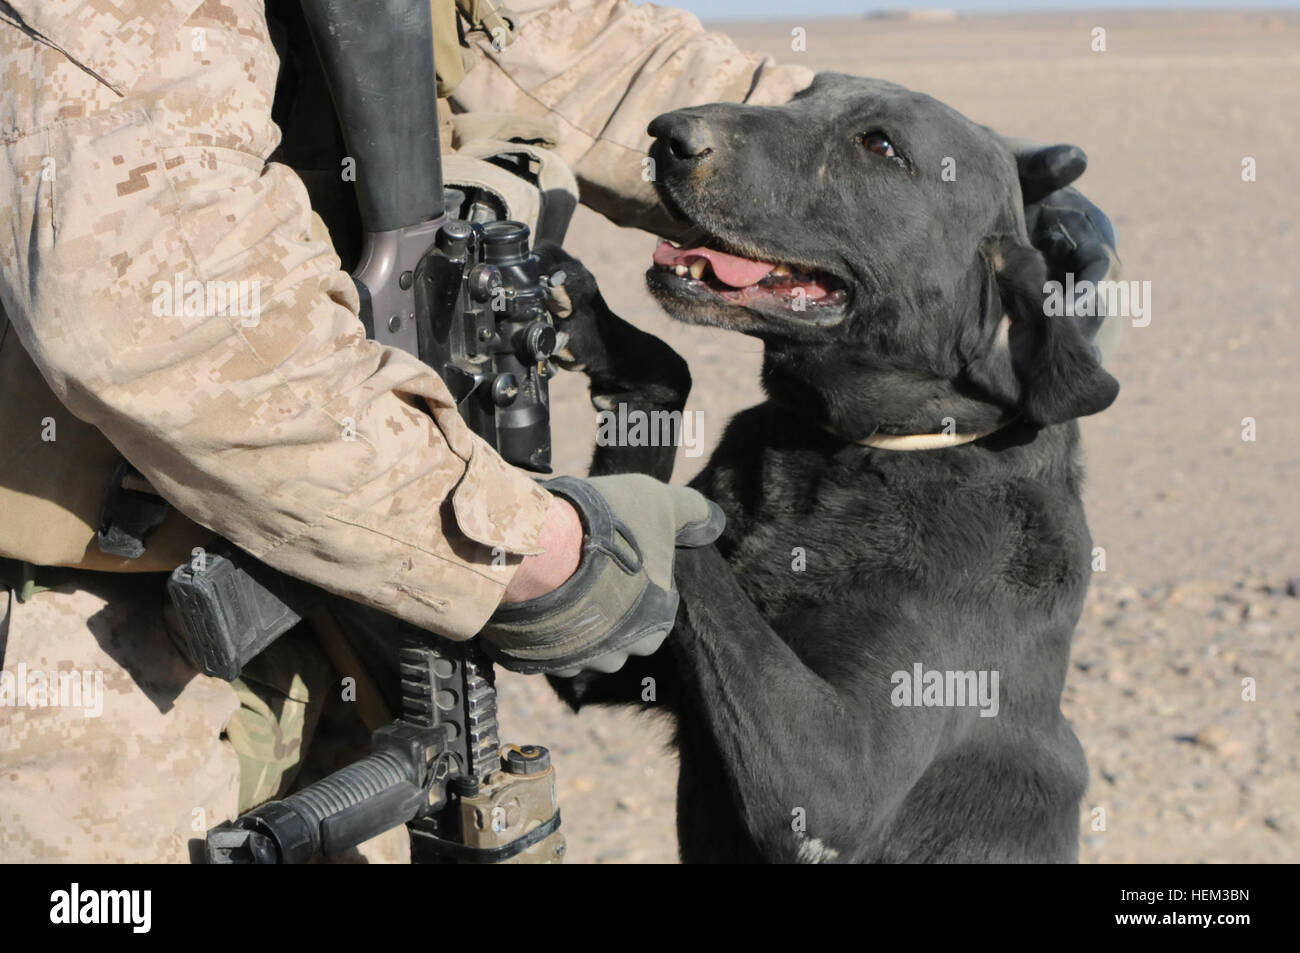 Stormy, a working dog with the 2nd Battalion 11th Marines Headquarters Battery, takes a break and gets a pat from her owner, Cpl. Bryant Wahlen during a mission in Helmand province, Afghanistan. Every Marine a rifleman embodied by service members of 2-11 120310-A-PS391-282 Stock Photo